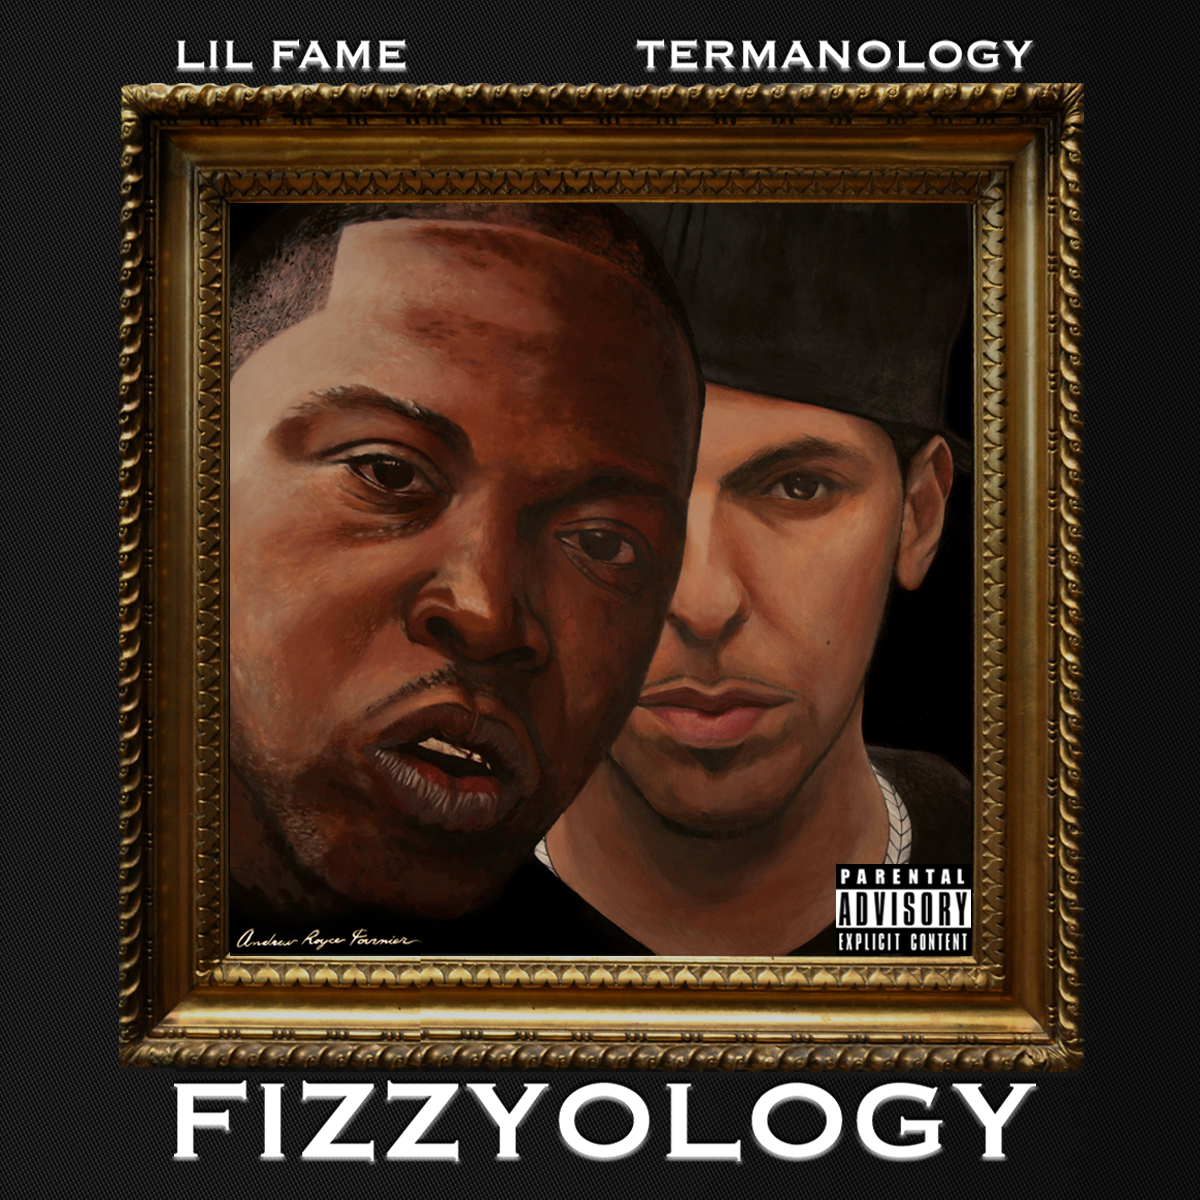 Lil Fame & Termanology - "Play Dirty" ft. Busta Rhymes & Styles P (Produced by DJ Premier)